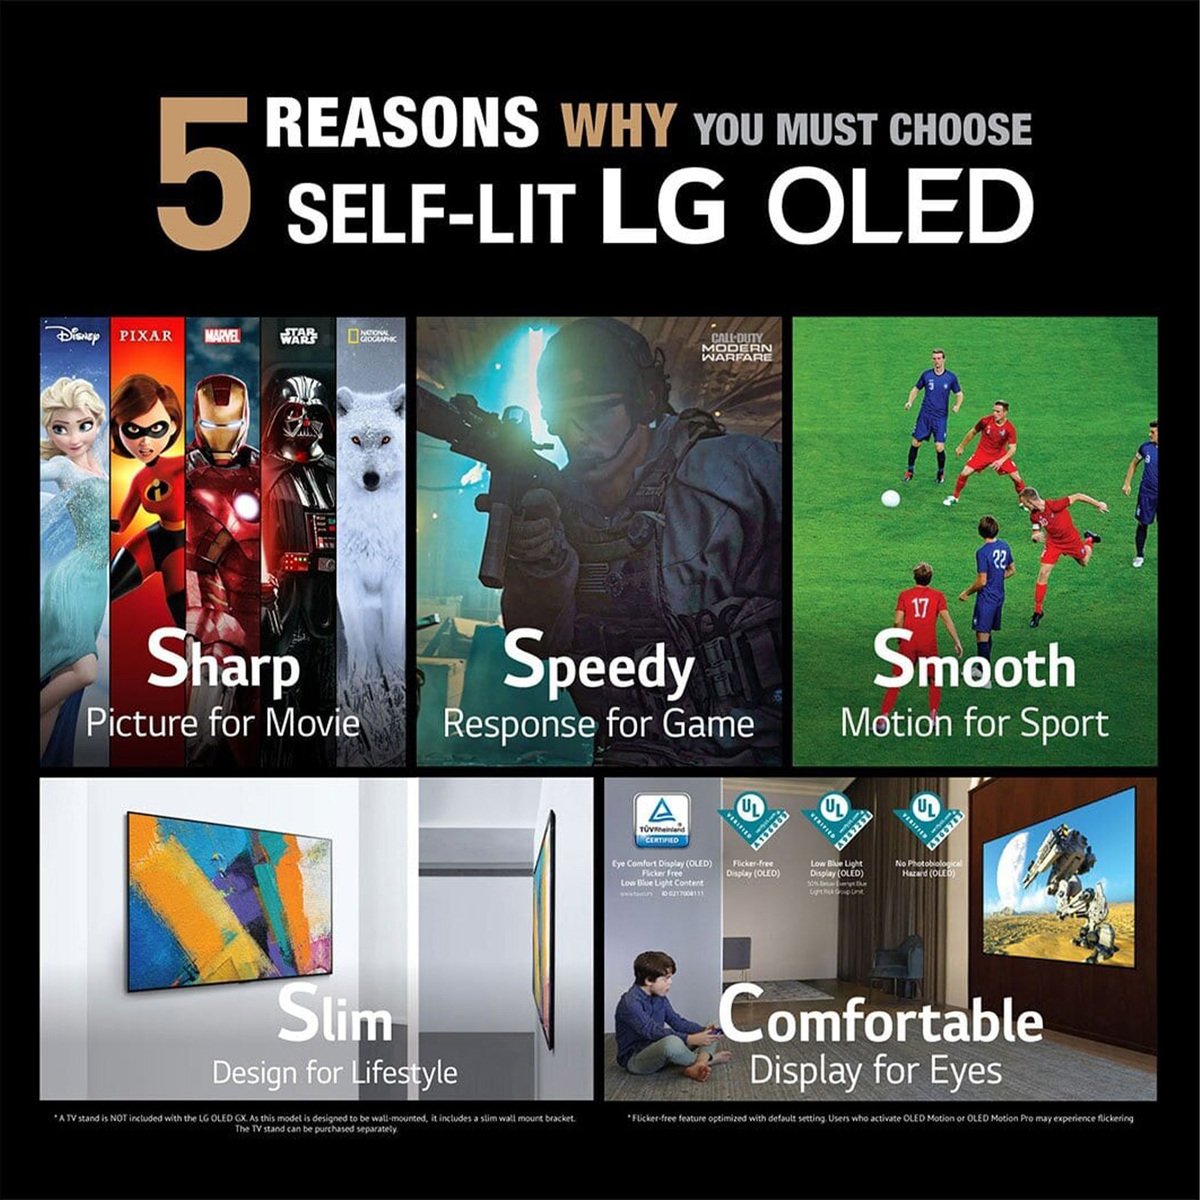 LG OLED 4K Smart TV 55 Inch C1 Series Cinema Screen Design, New 2021 4K Cinema HDR webOS Smart with ThinQ AI Pixel Dimming